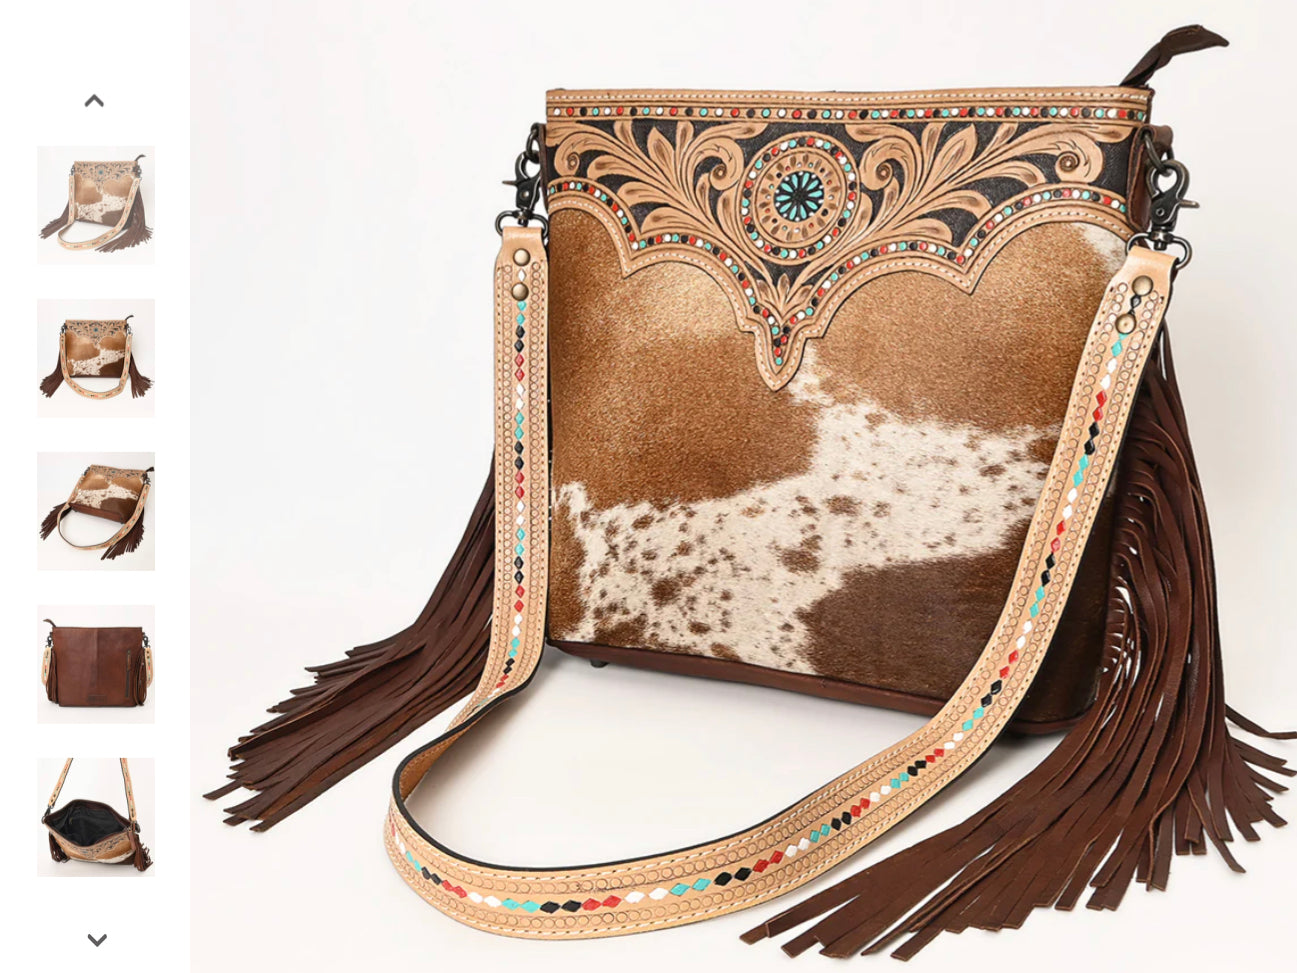 AMERICAN DARLING HAIR ON HAND TOOLED PURSE WITH LEATHER FRINGE